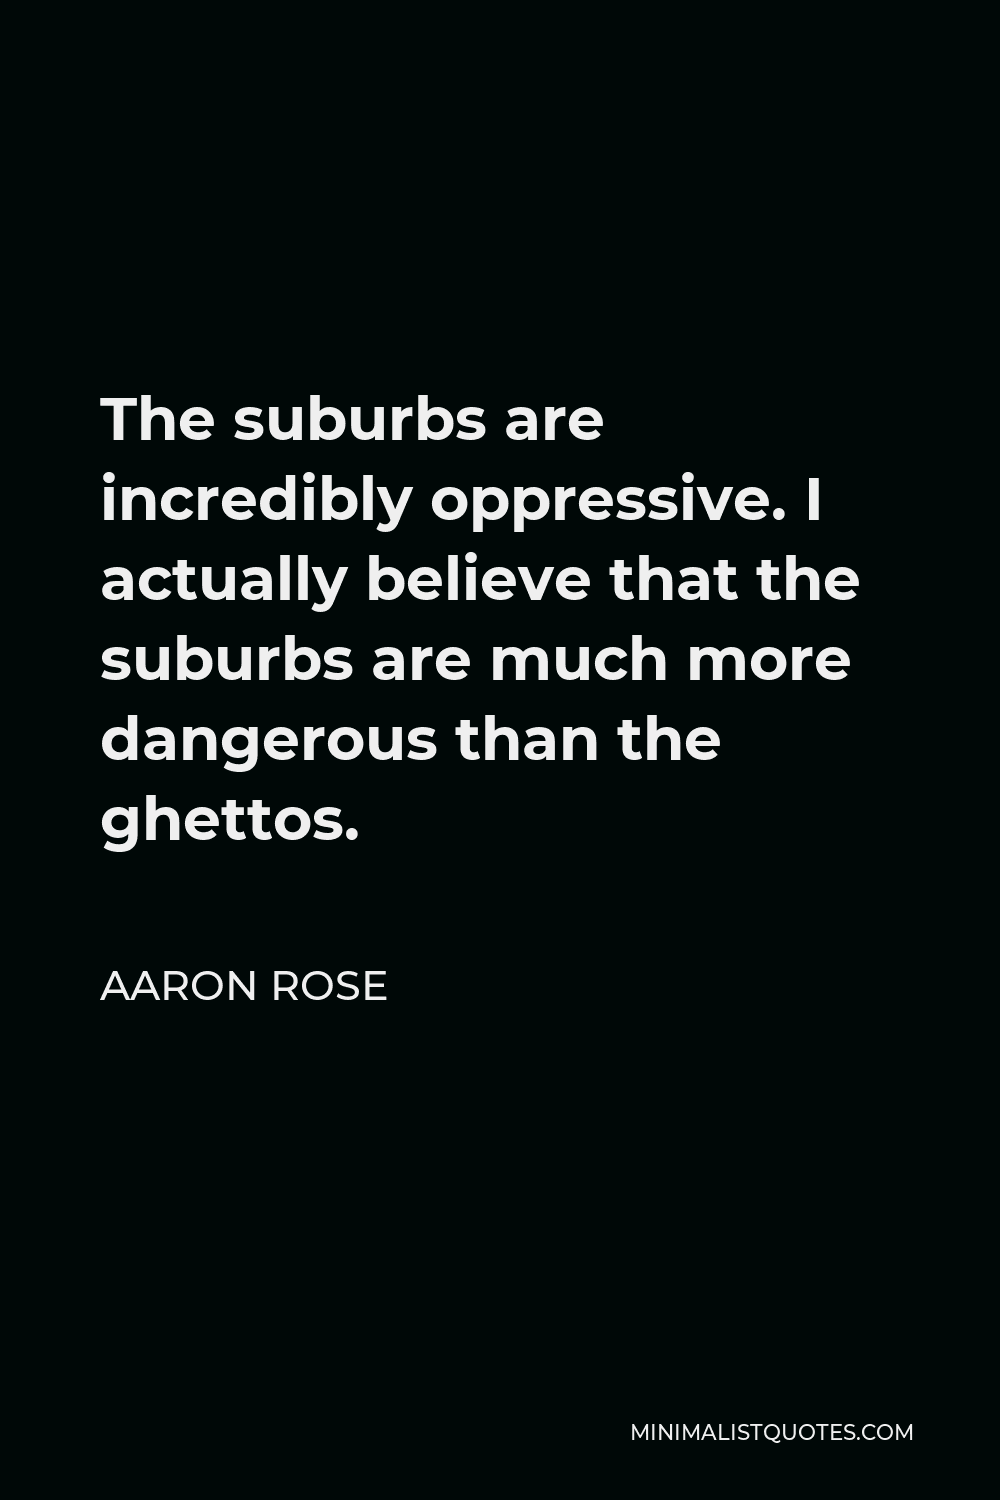 Aaron Rose Quote - The suburbs are incredibly oppressive. I actually believe that the suburbs are much more dangerous than the ghettos.